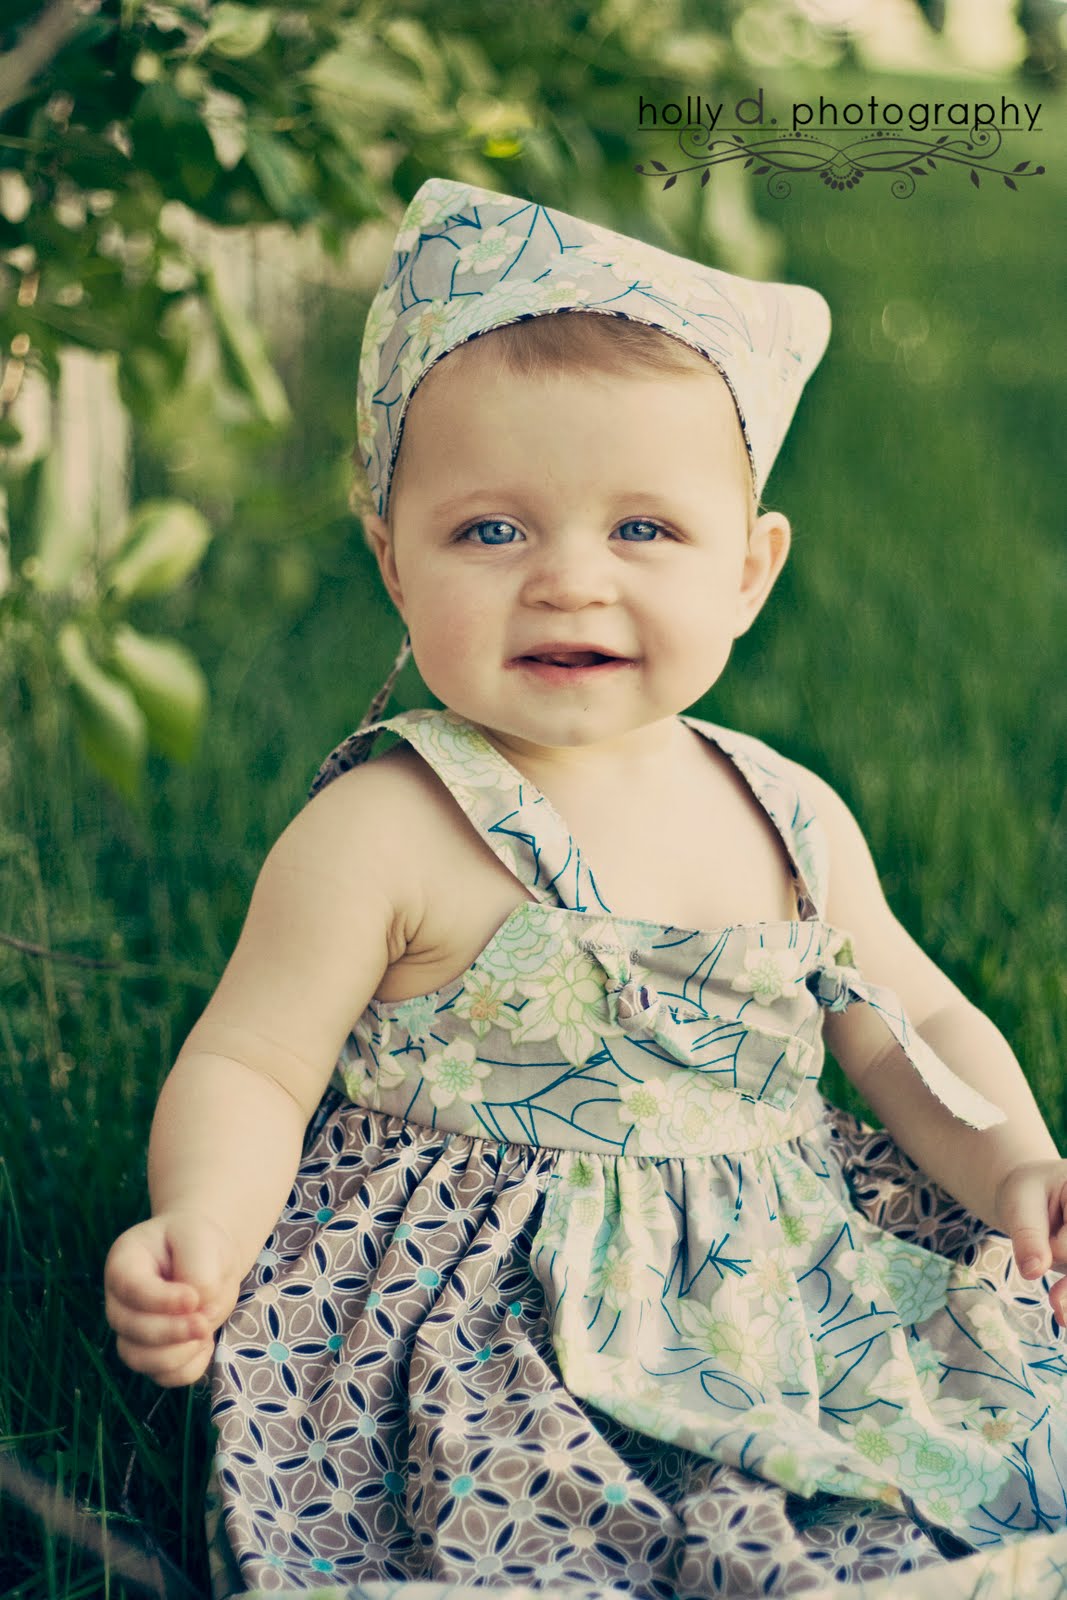 Holly D Photography & Designs: 11 Months Old and Growing Too Fast!